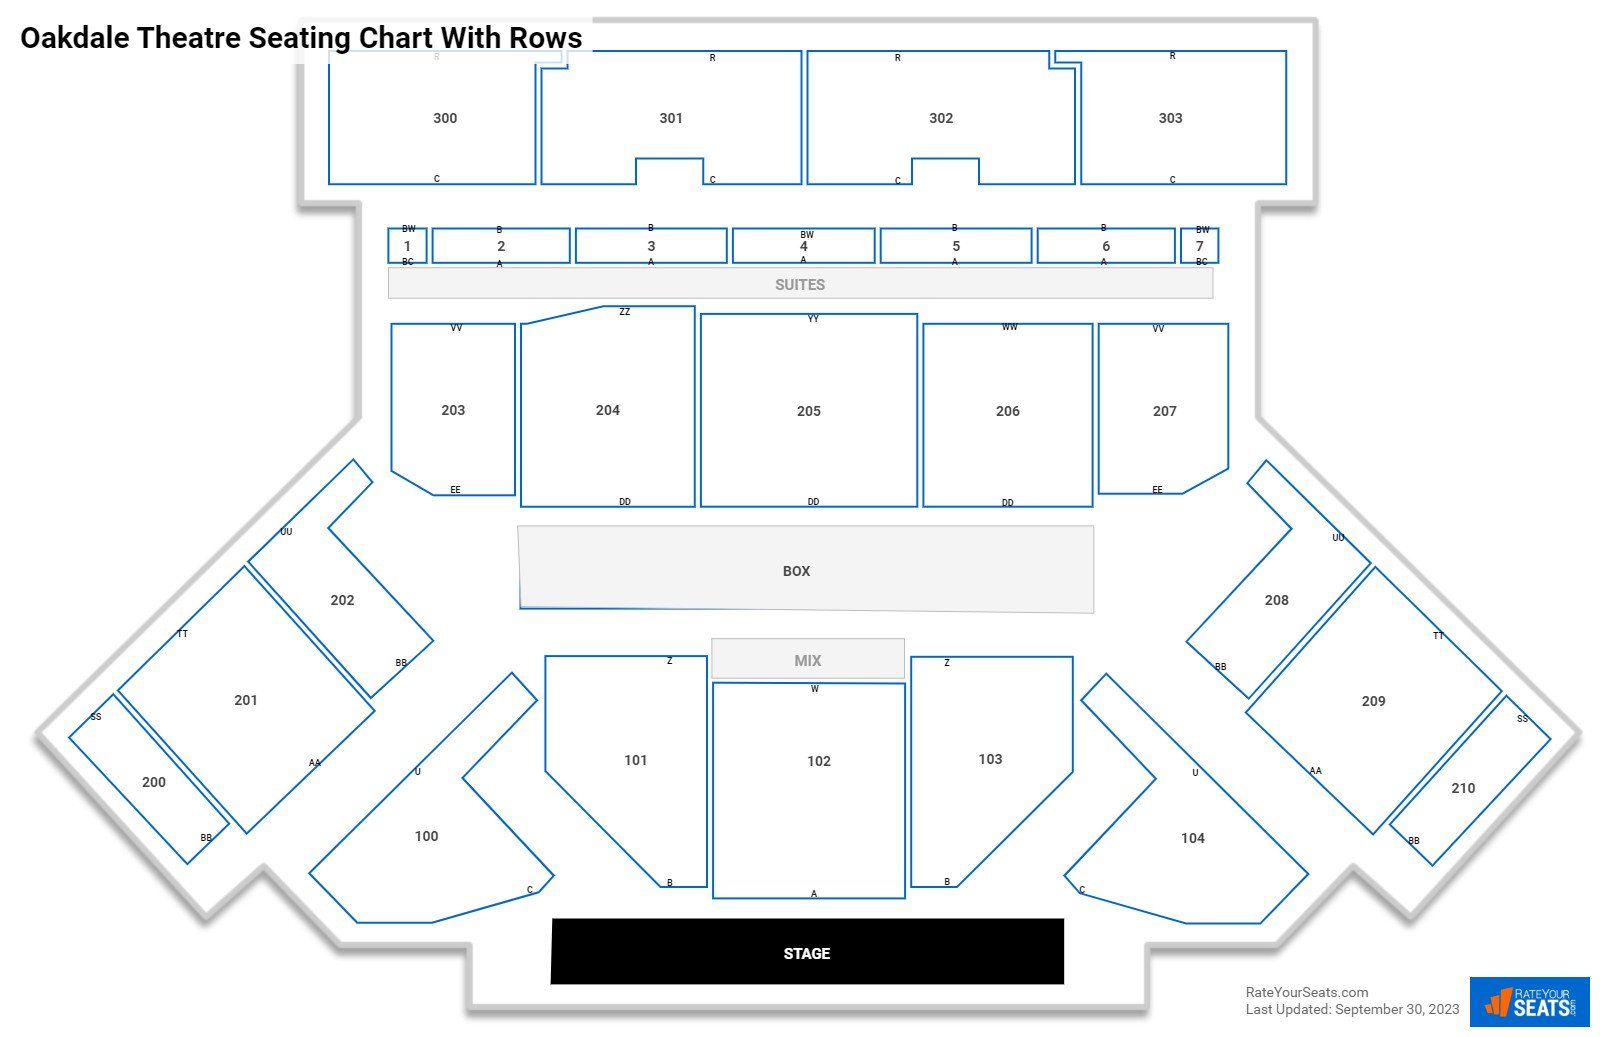 Oakdale Theatre seating chart with row numbers